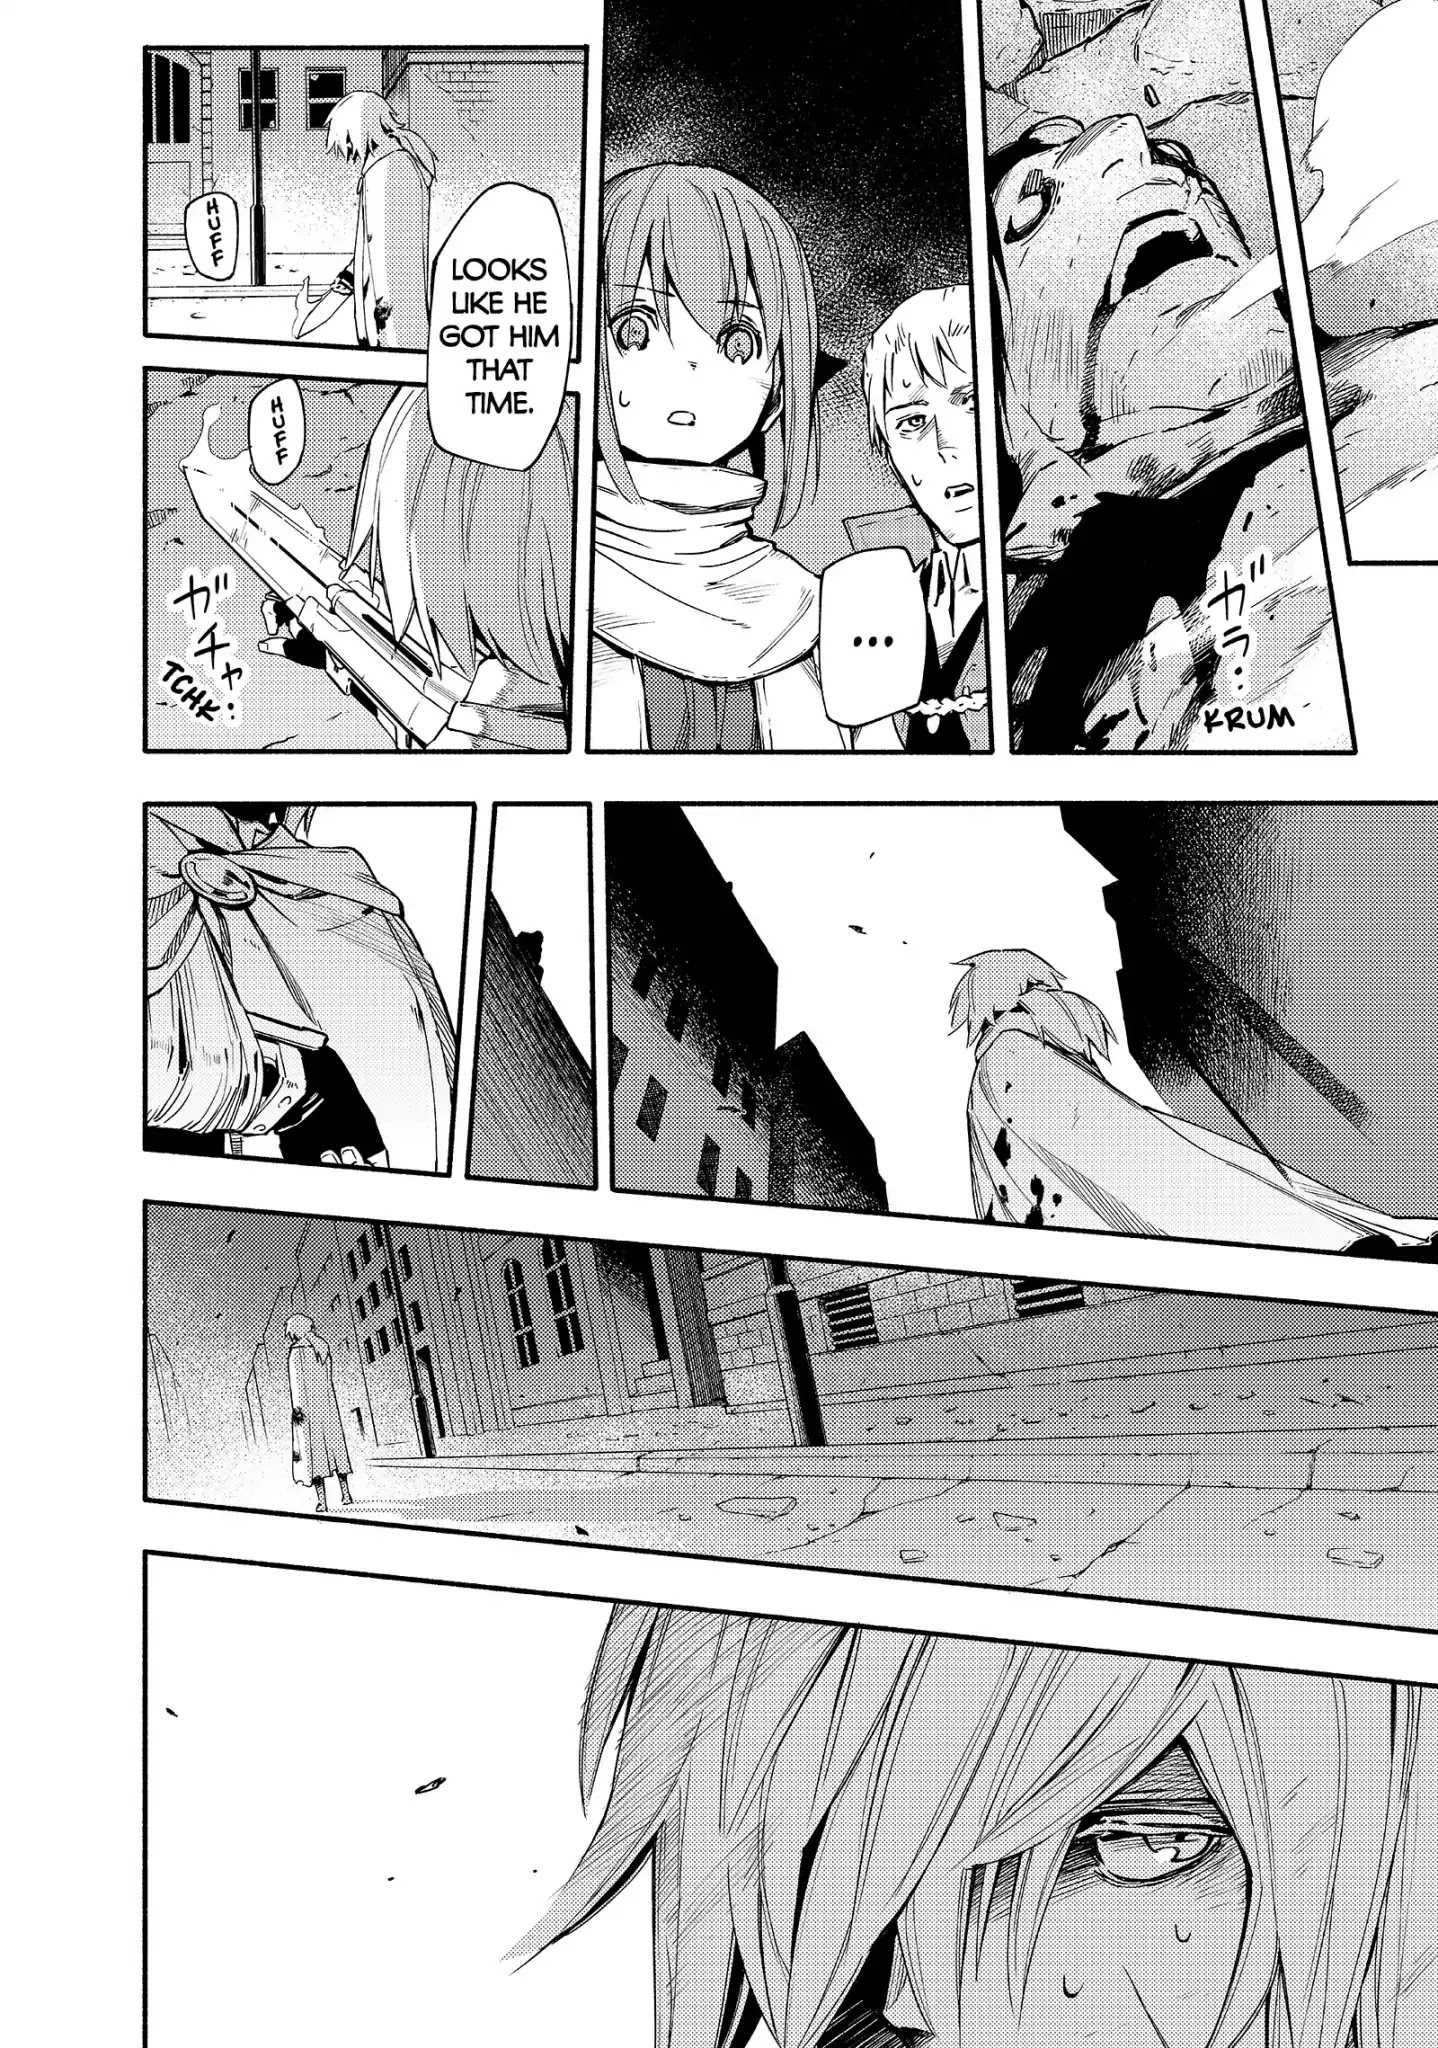 Ayanashi Chapter 12: The Avatar of Death